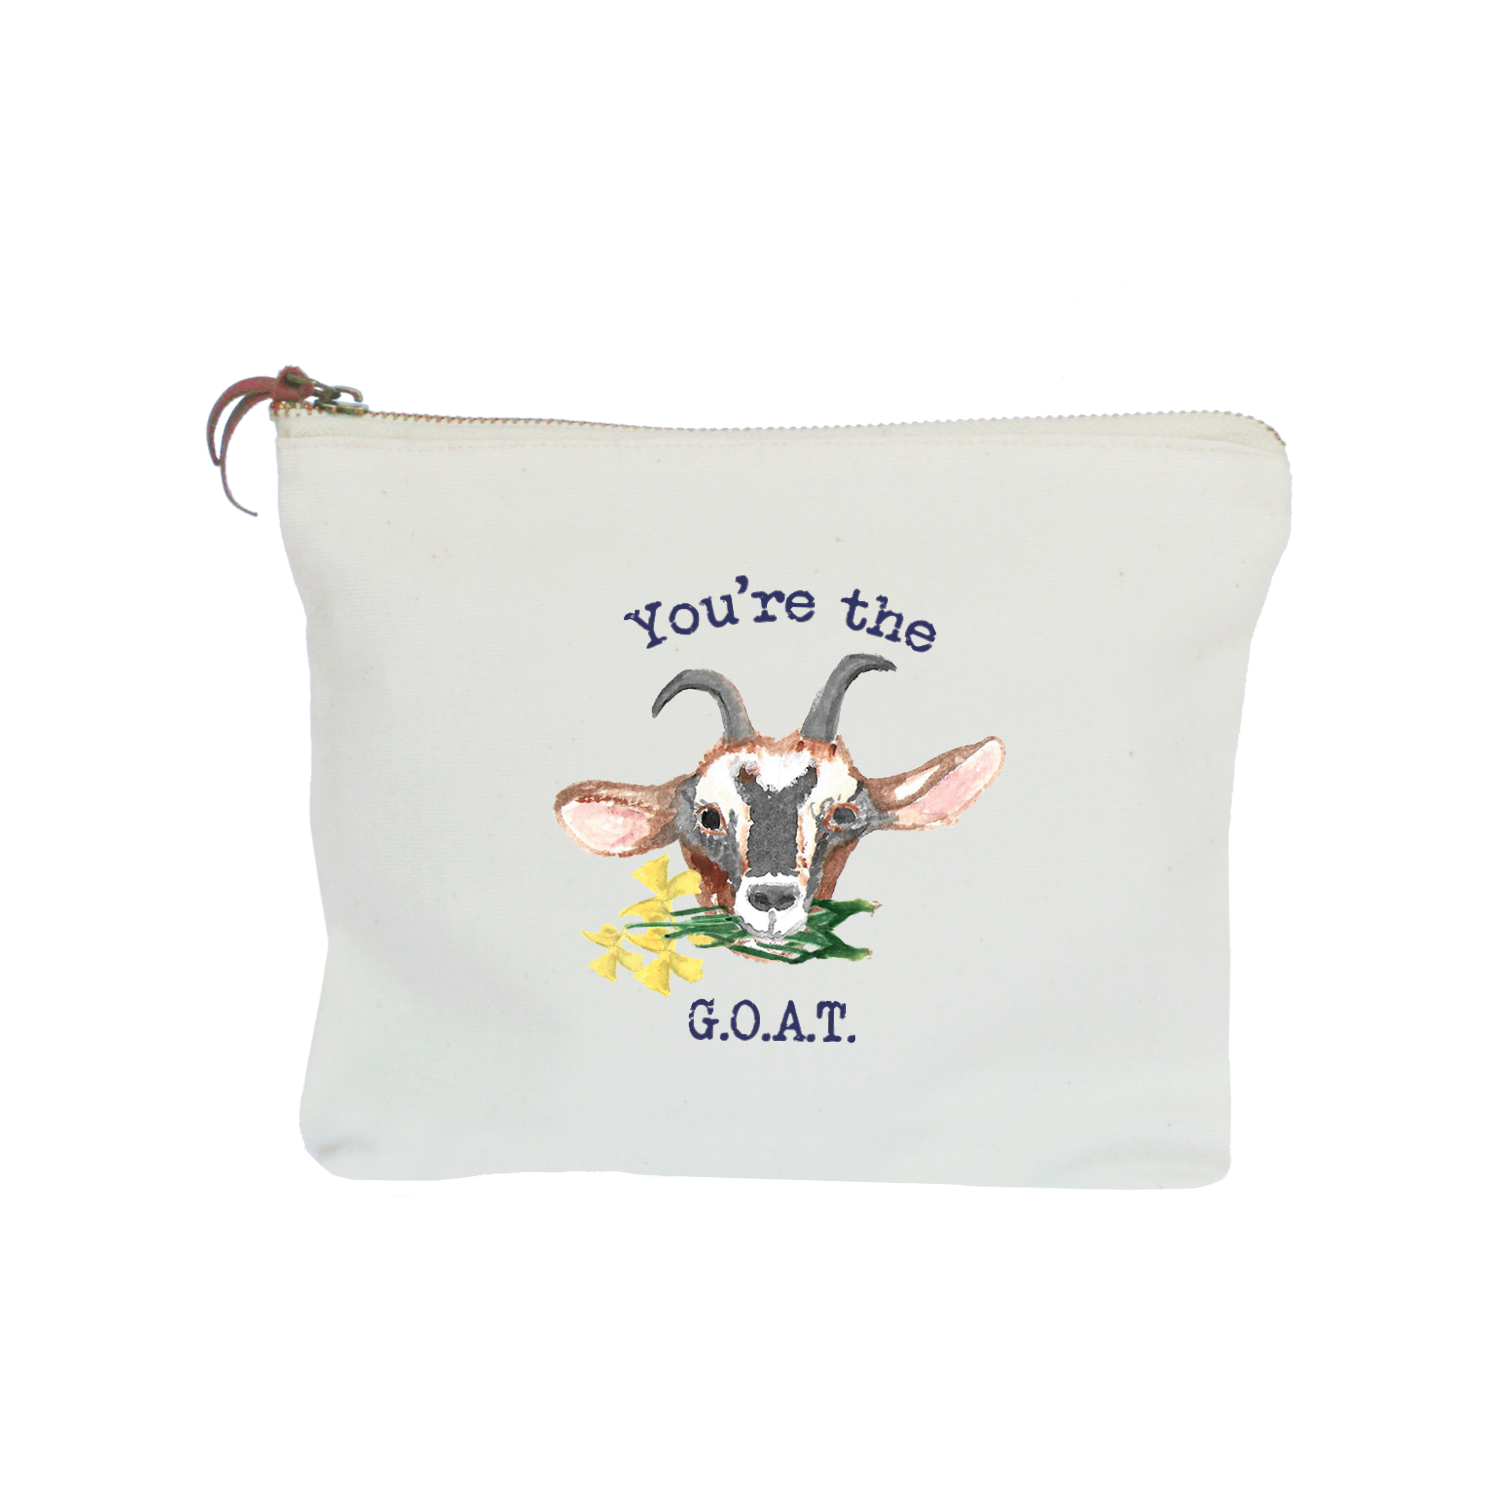 you're the goat zipper pouch